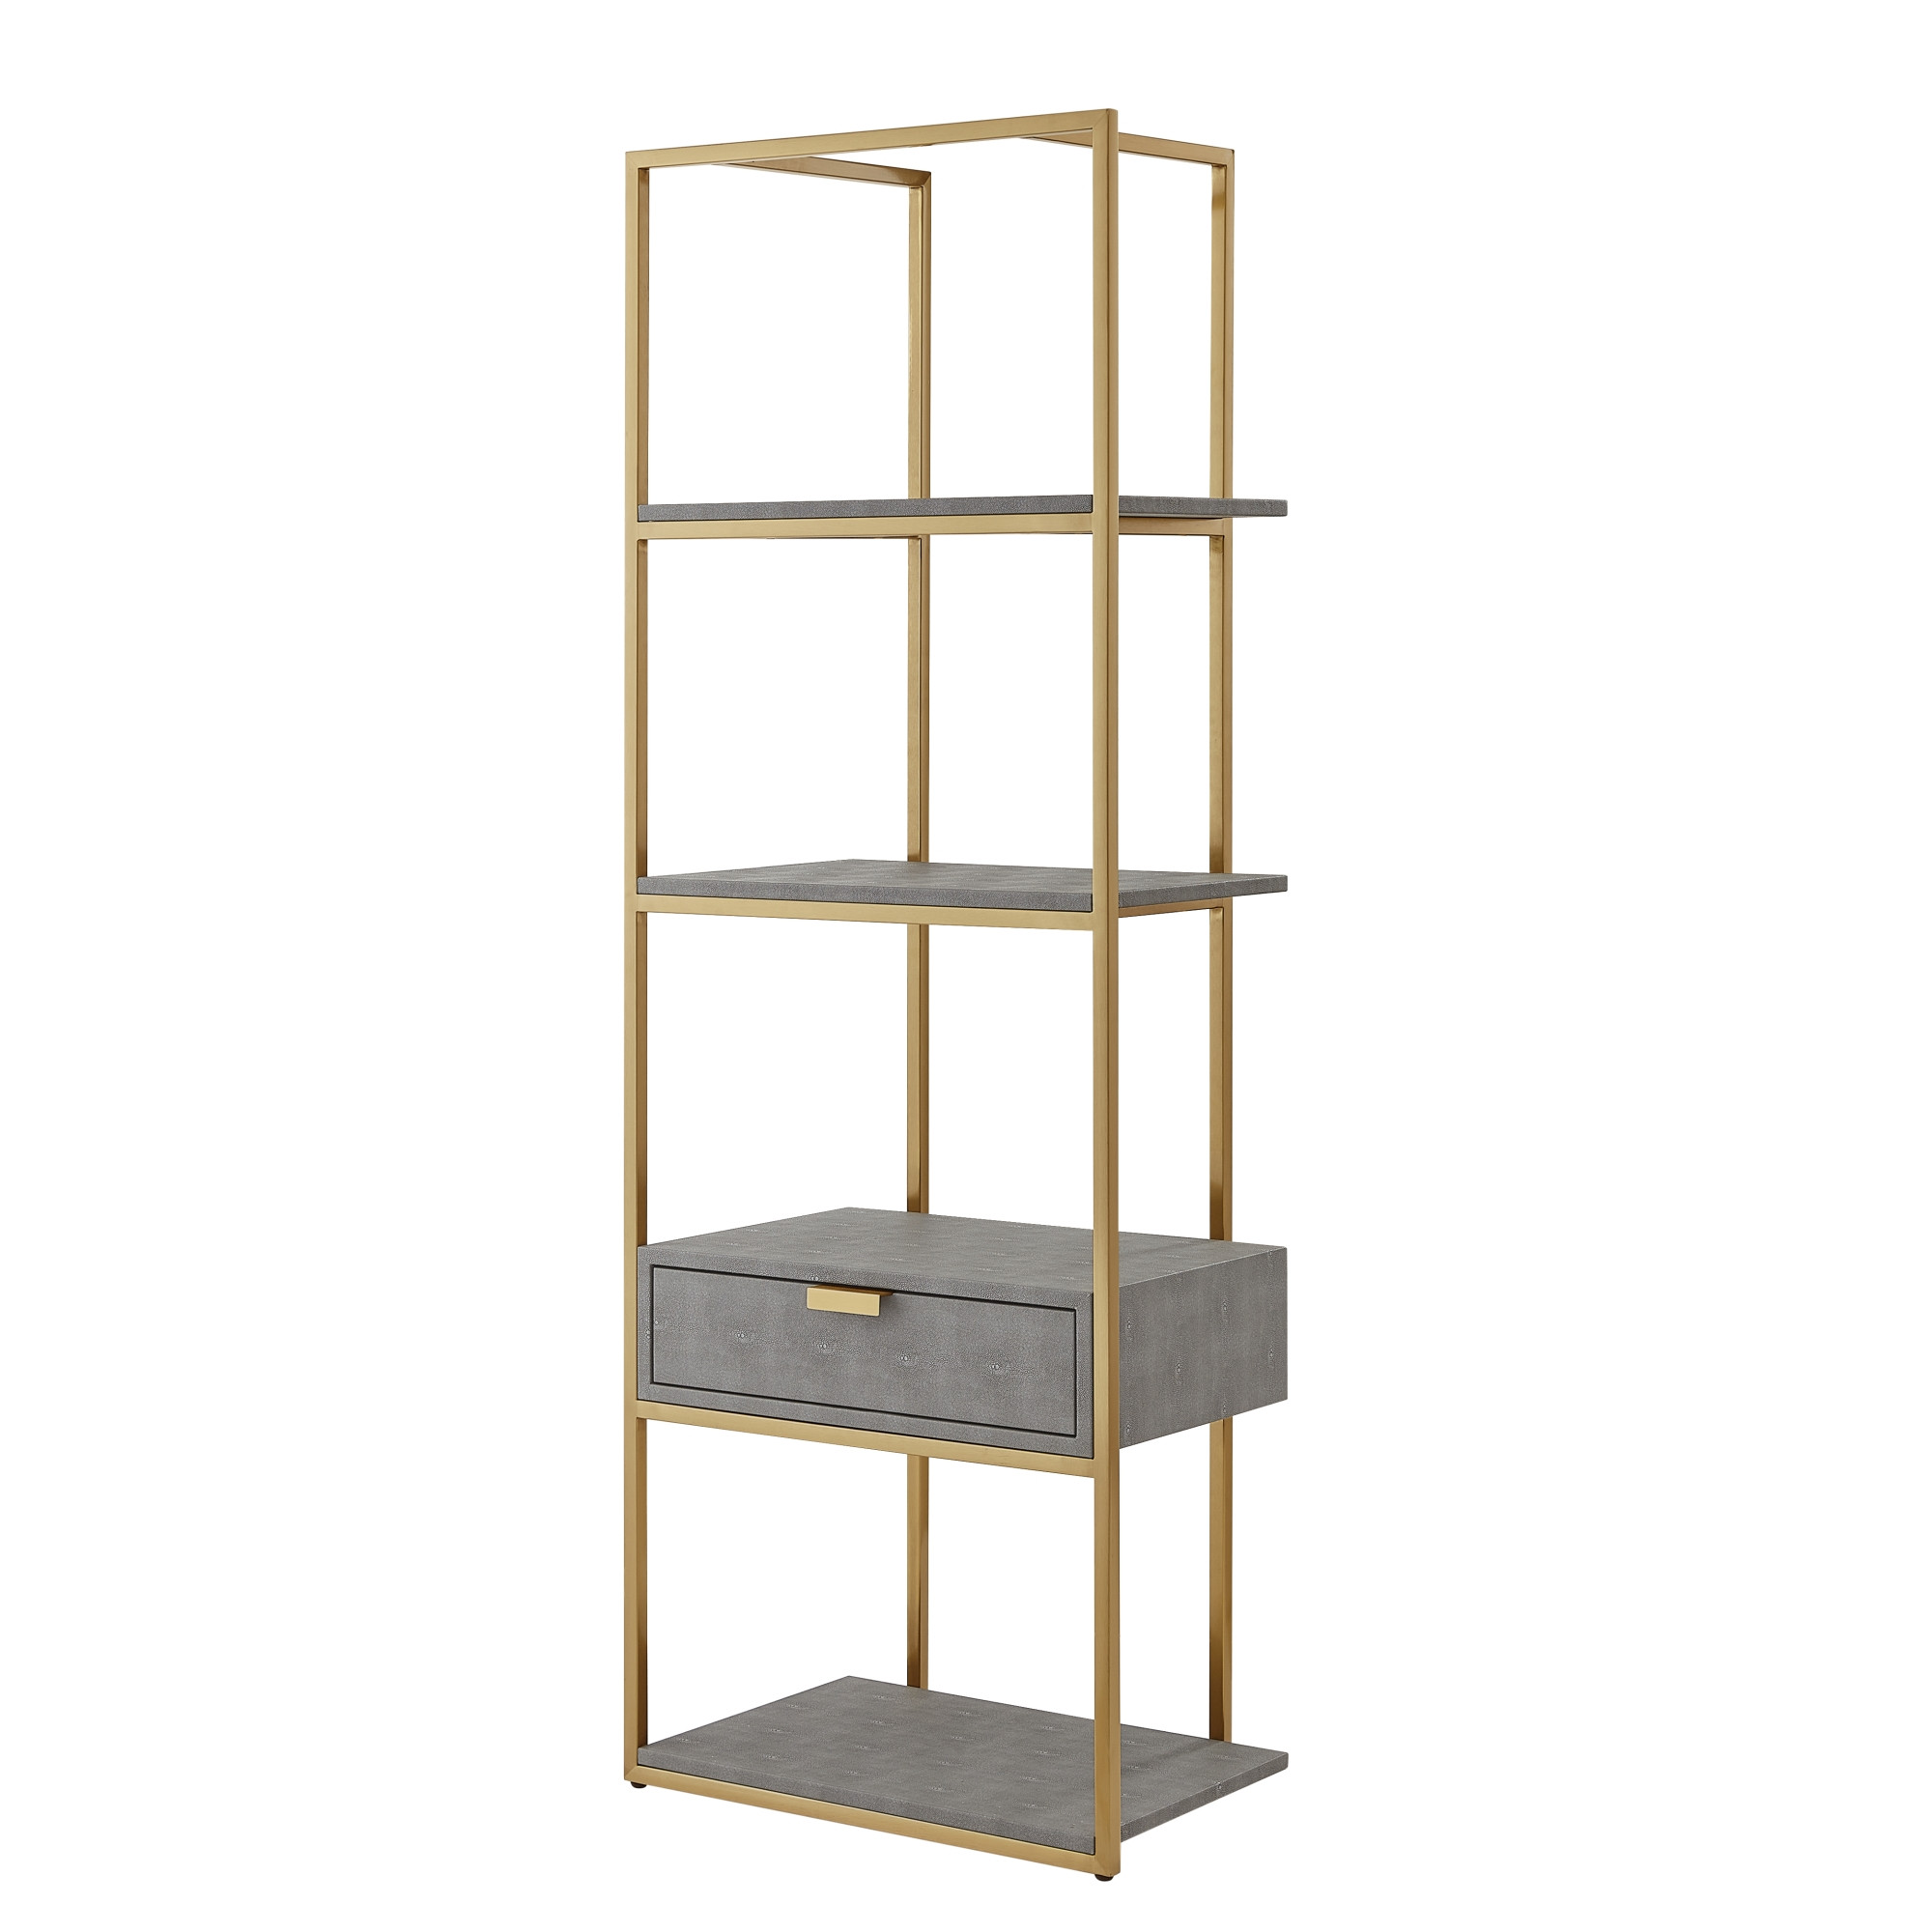 68" Gray Stainless Steel Four Tier Etagere Bookcase with a drawer-544738-1